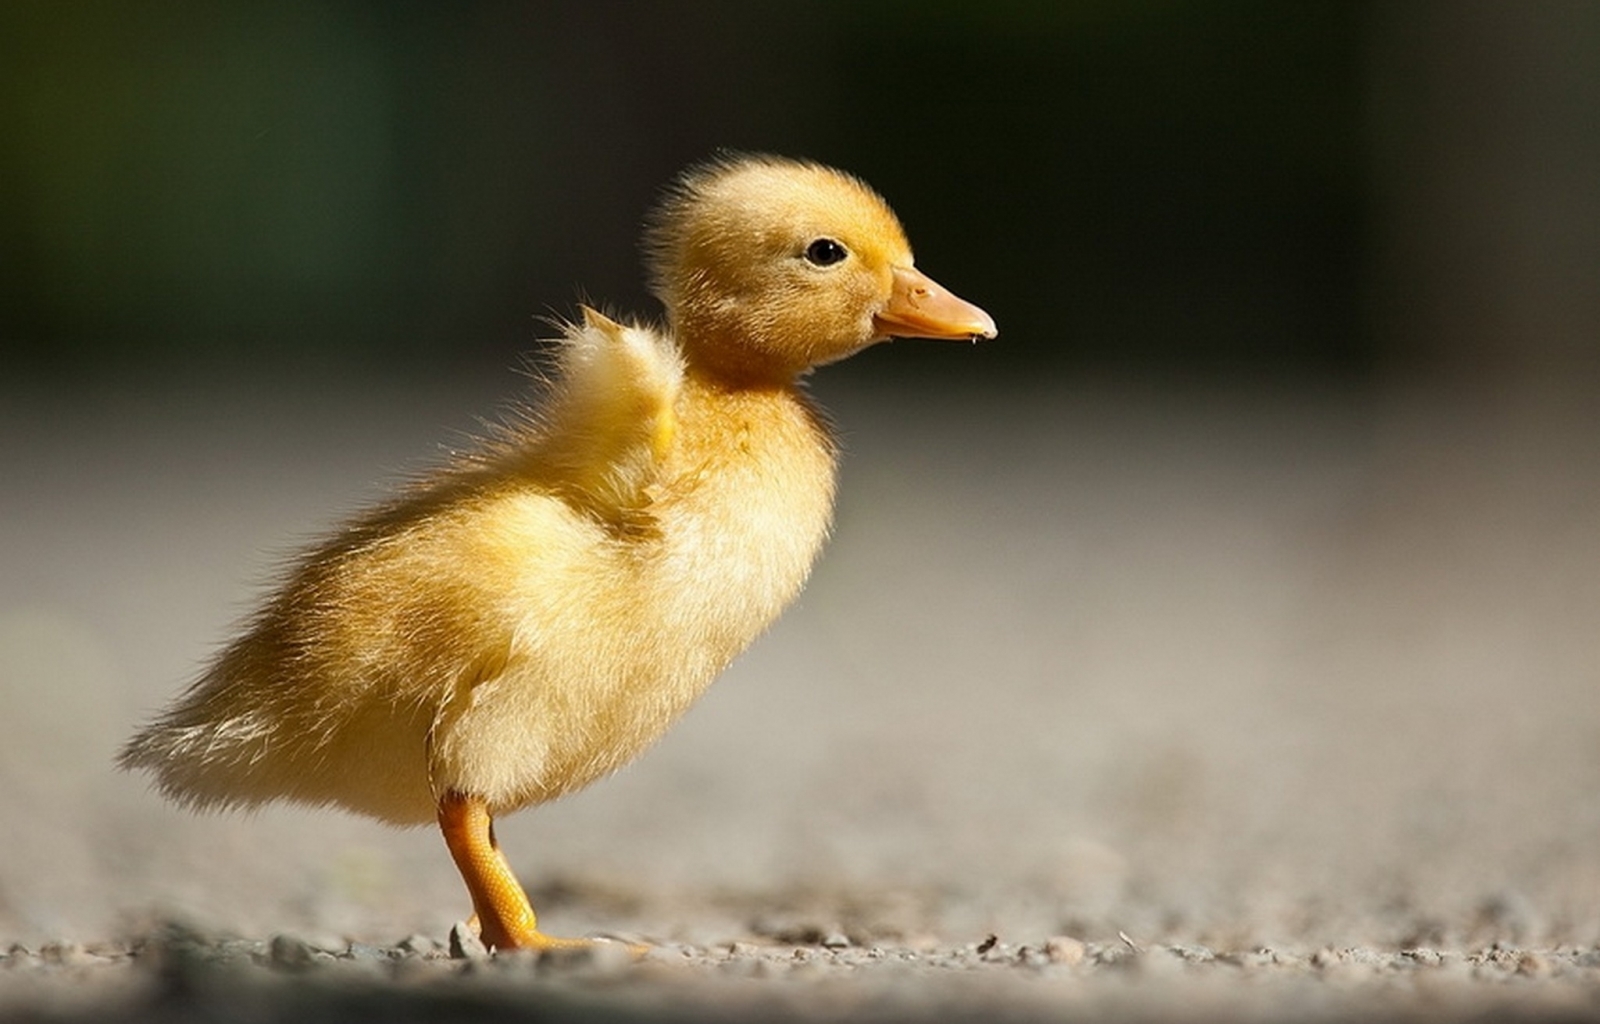 23350 Screensavers and Wallpapers Chicks for phone. Download animals, birds, chicks, yellow pictures for free